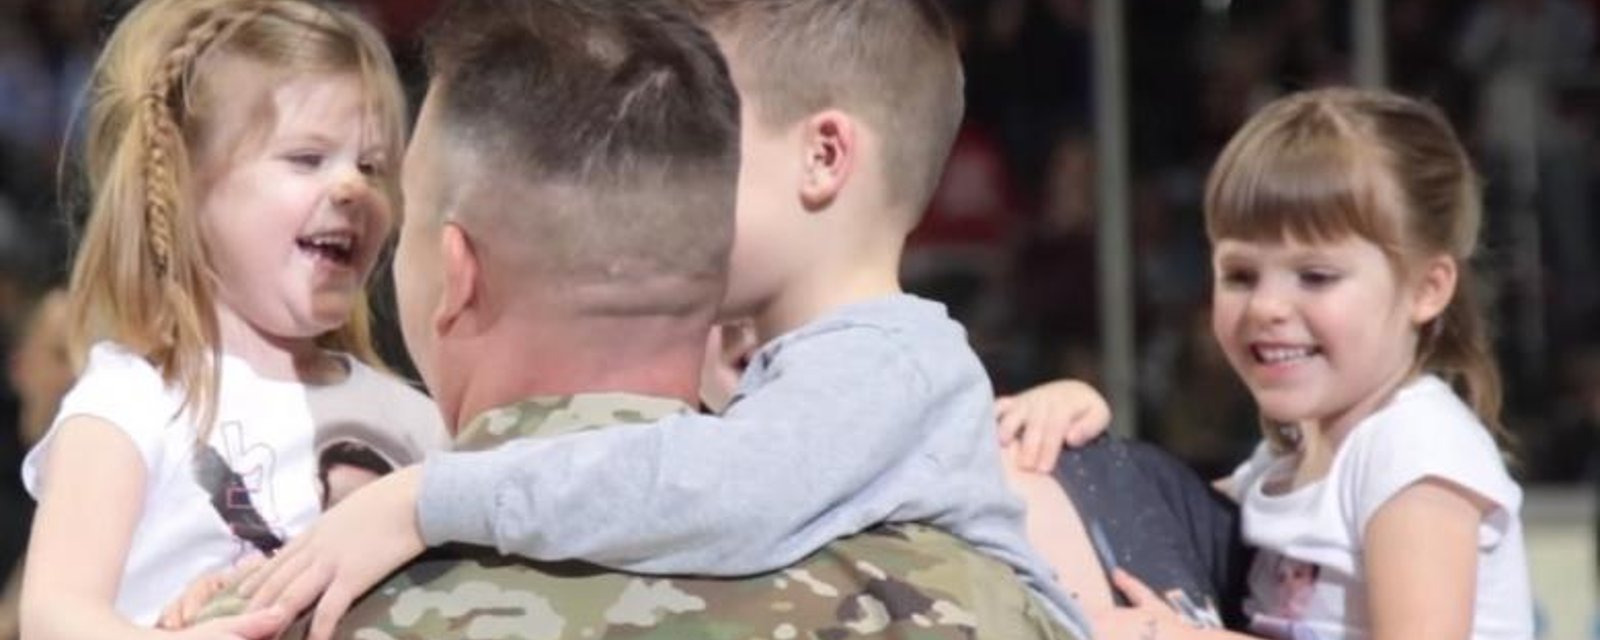 Soldier disguises himself at hockey game to surprise his children.